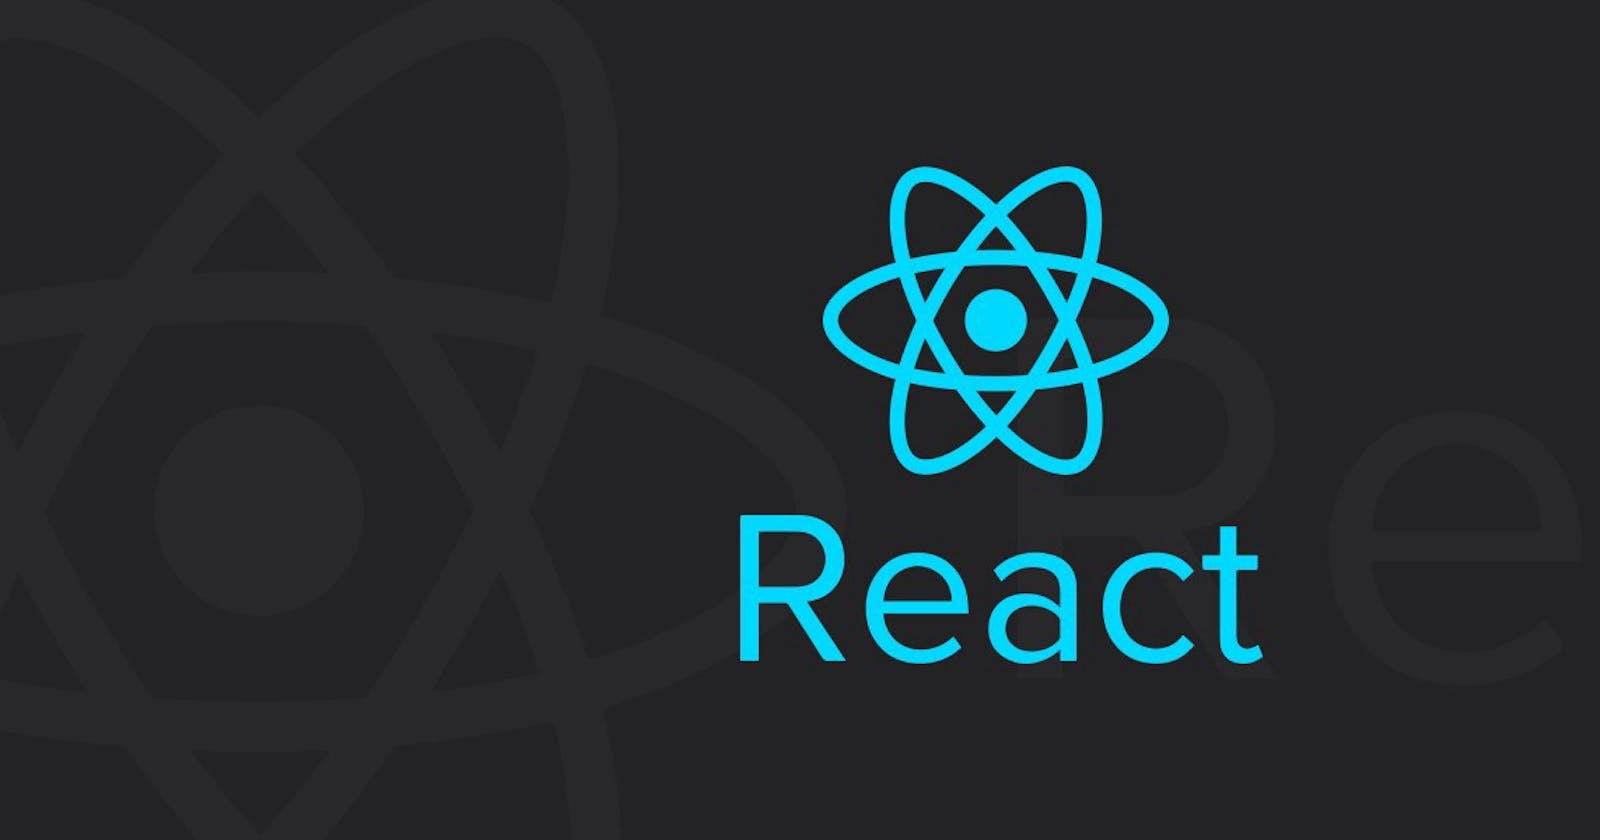 Getting started with React